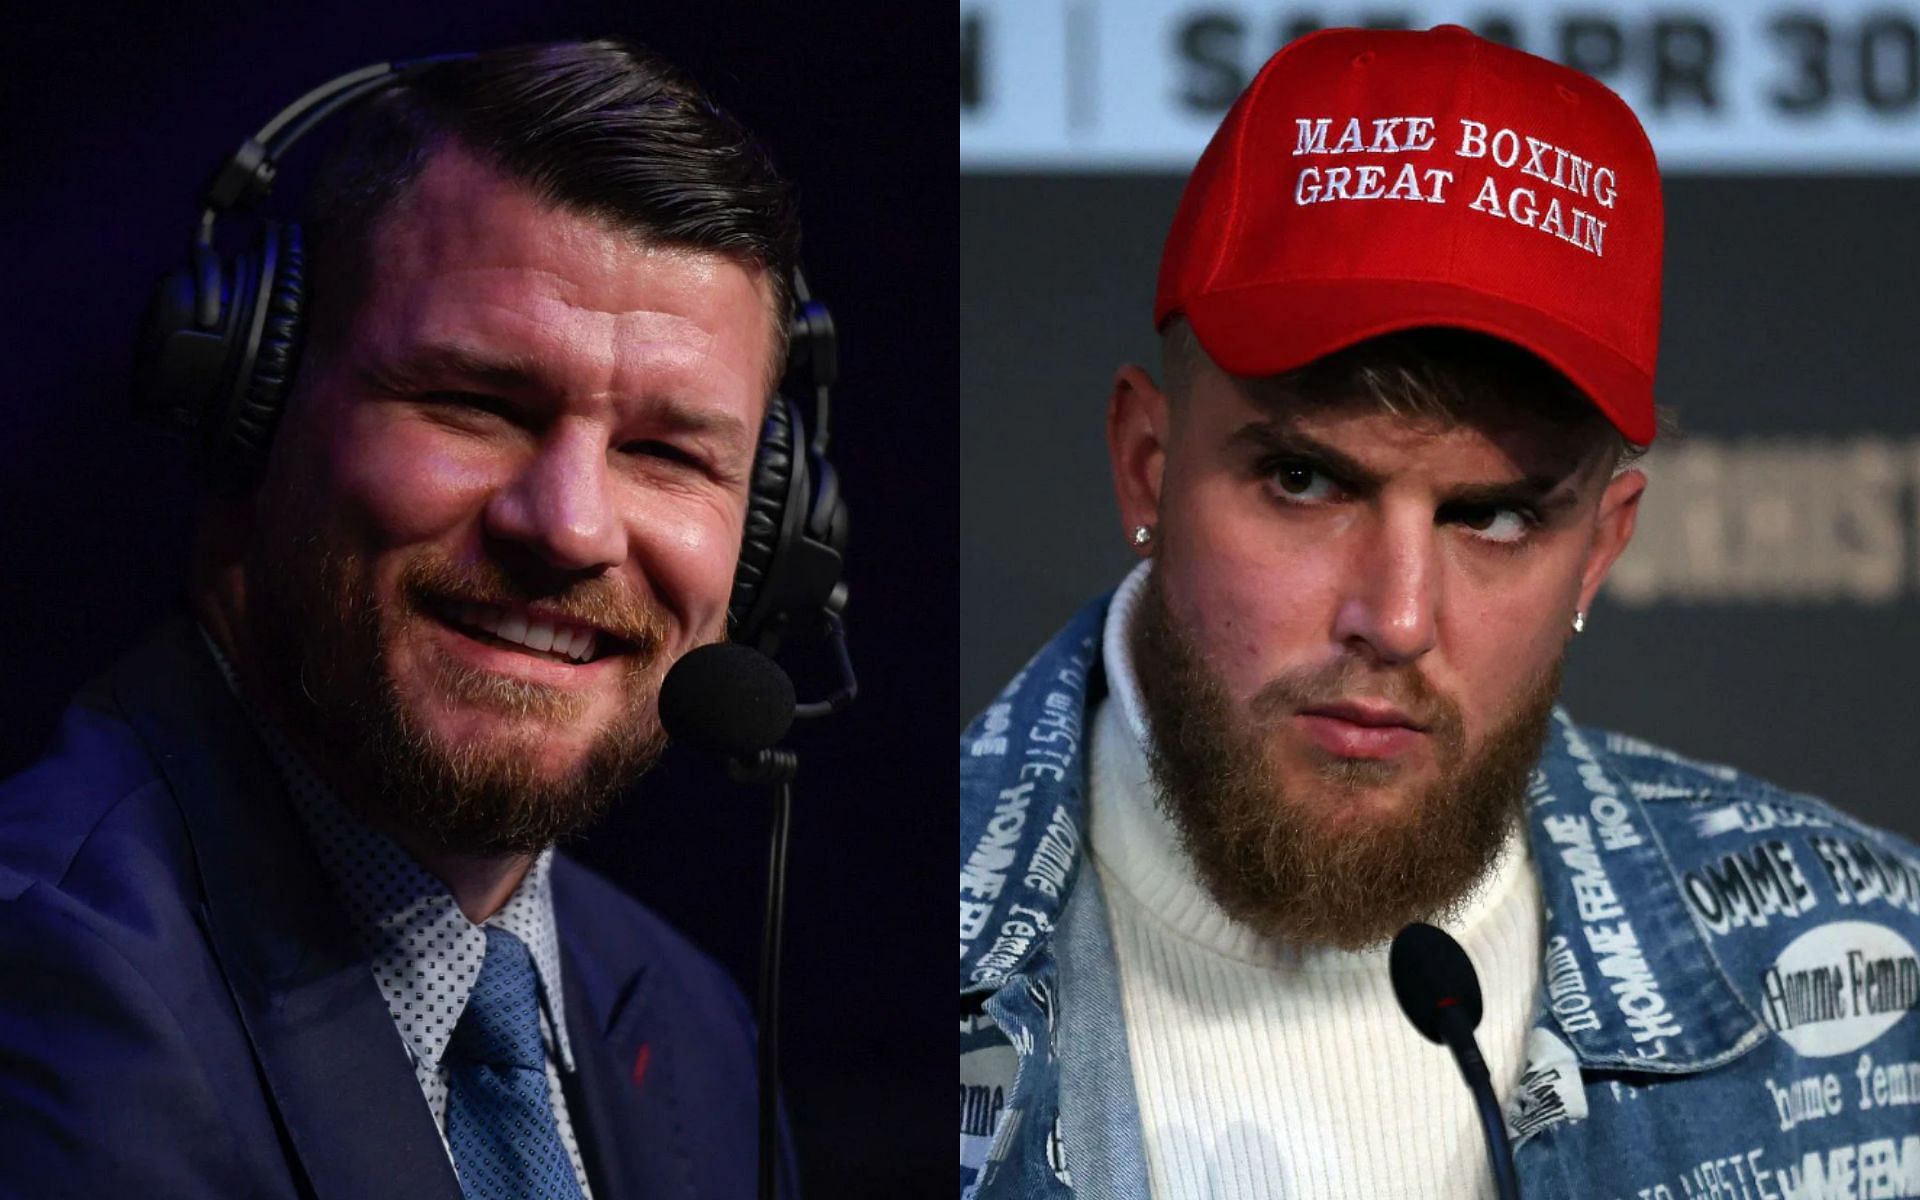 Michael Bisping (left), Jake Paul (right)